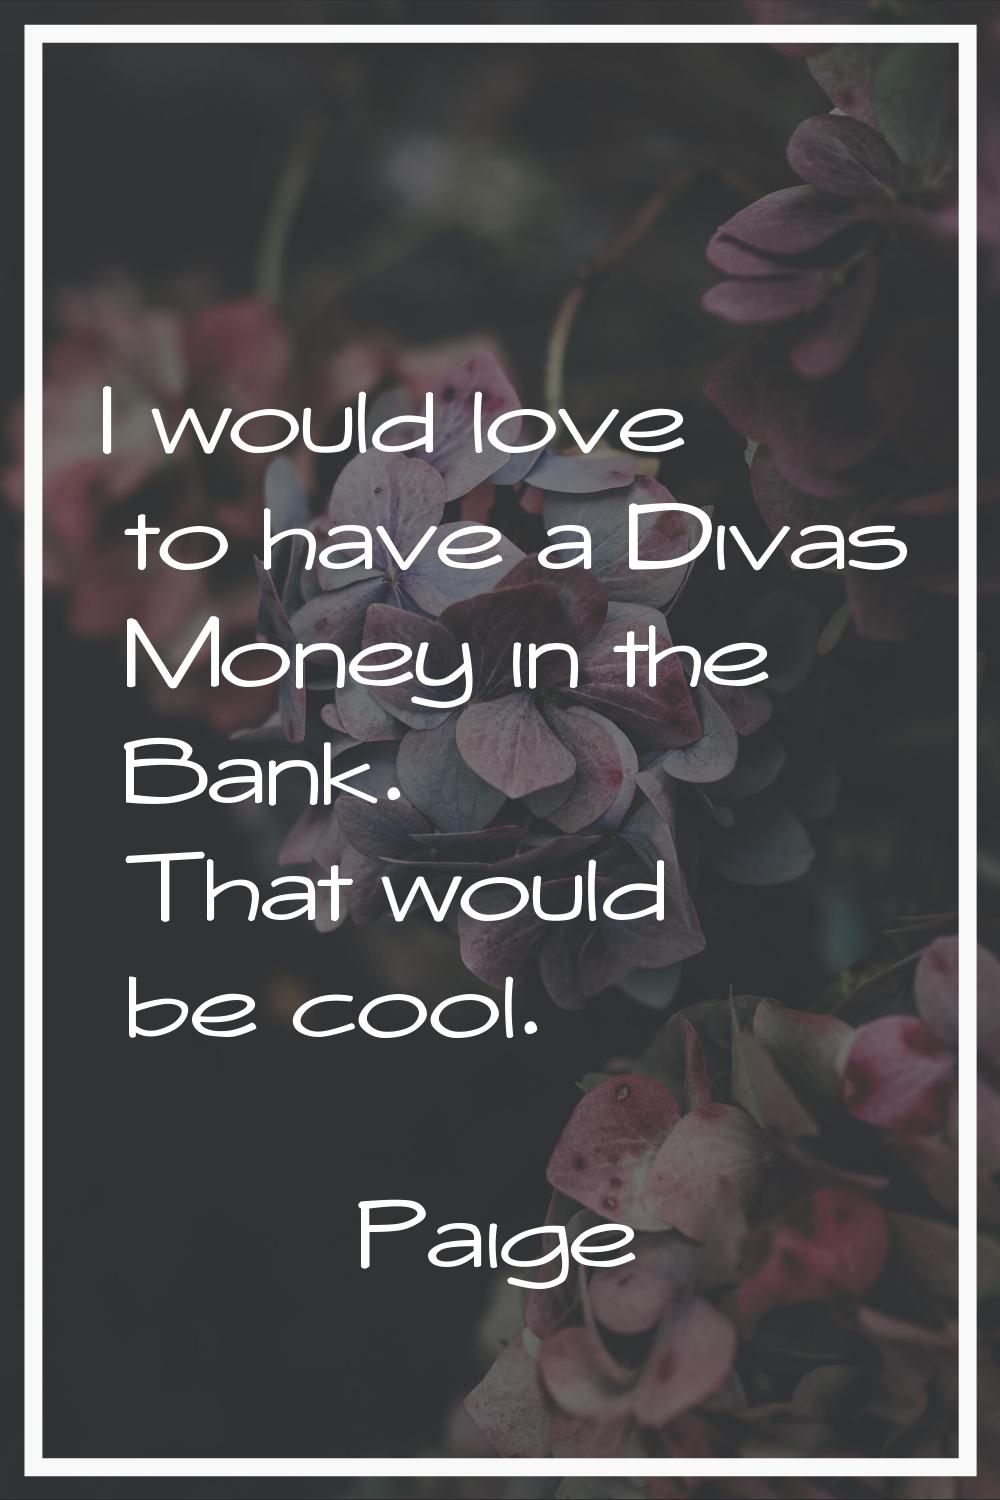 I would love to have a Divas Money in the Bank. That would be cool.